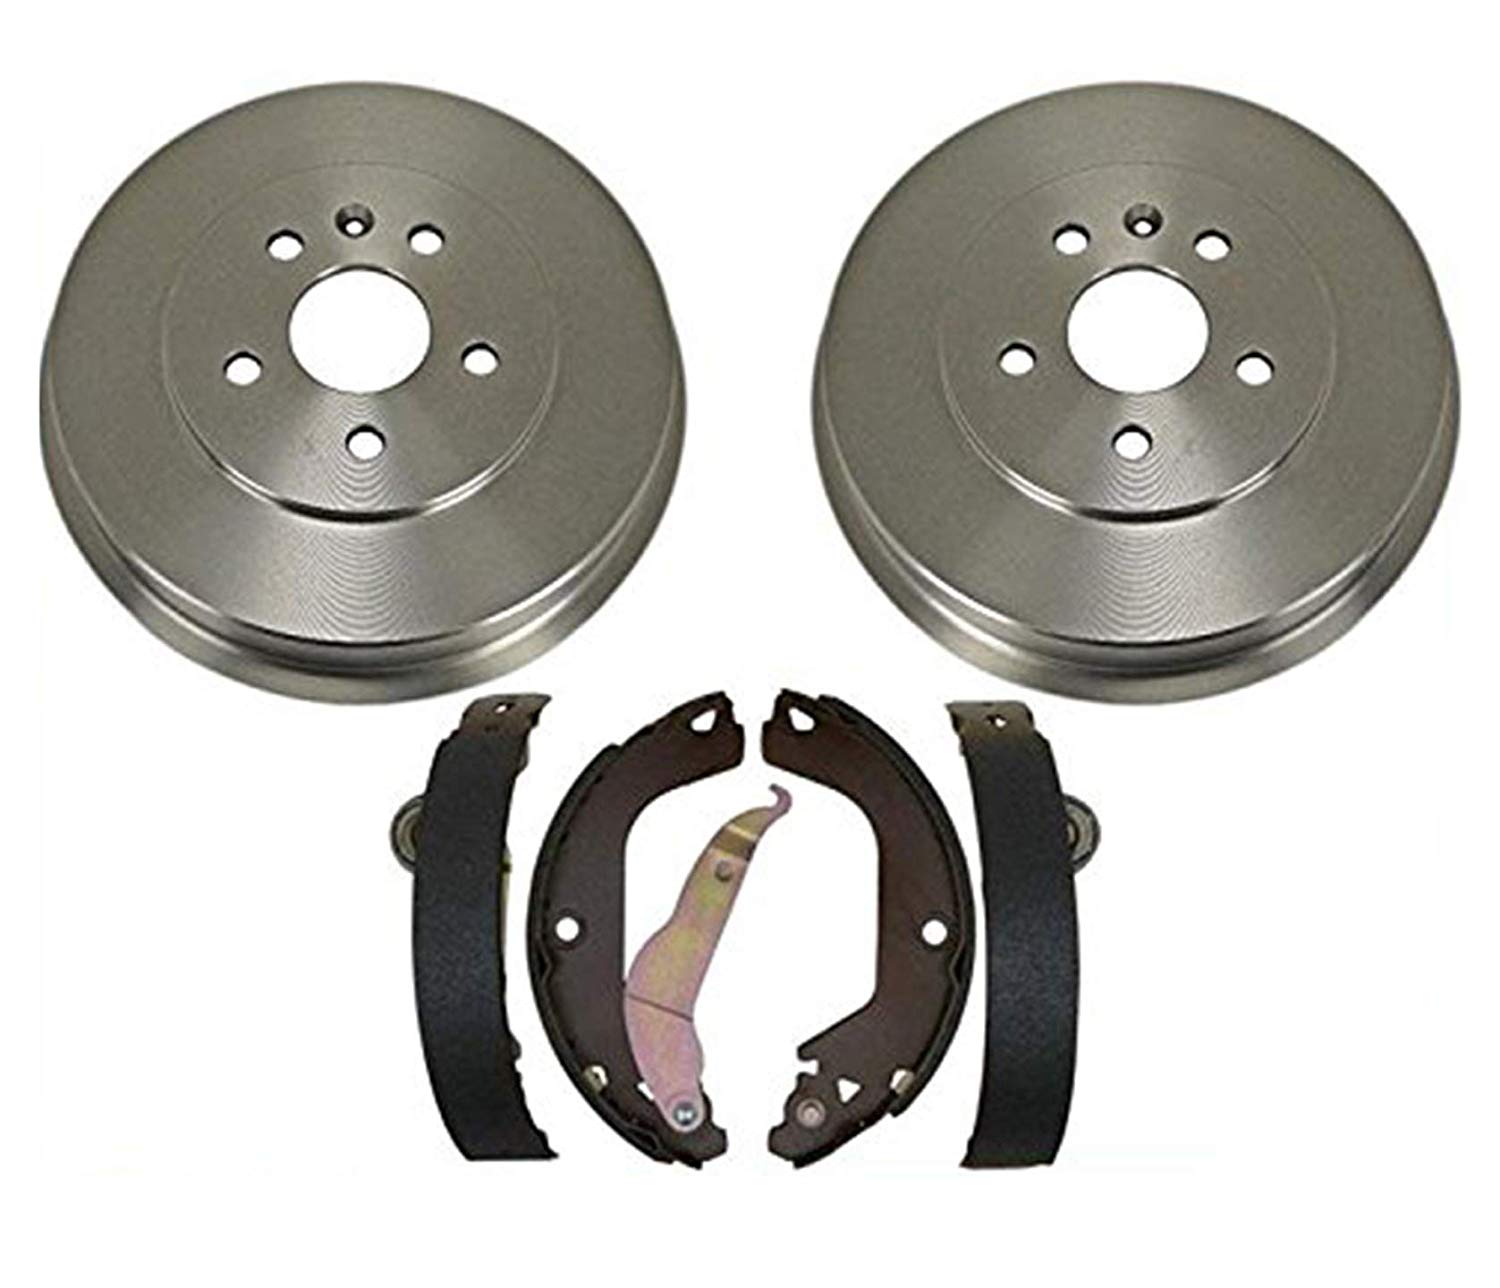 Fits 10-15 Cruze 16 Limited New Rear Brakes Drums Brake Shoes + Springs 4pc